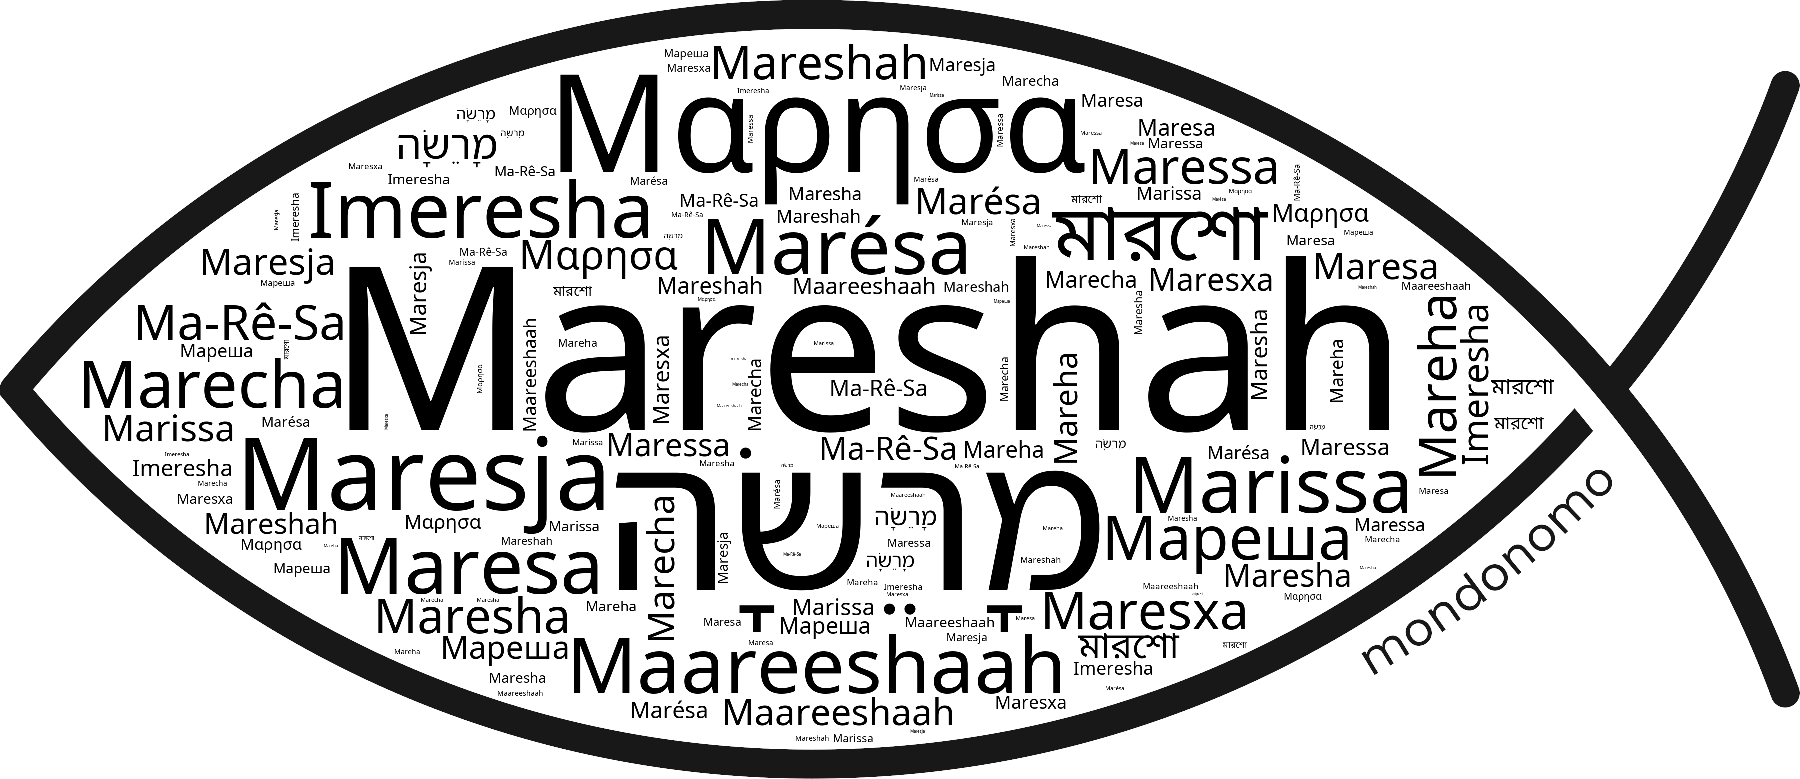 Name Mareshah in the world's Bibles